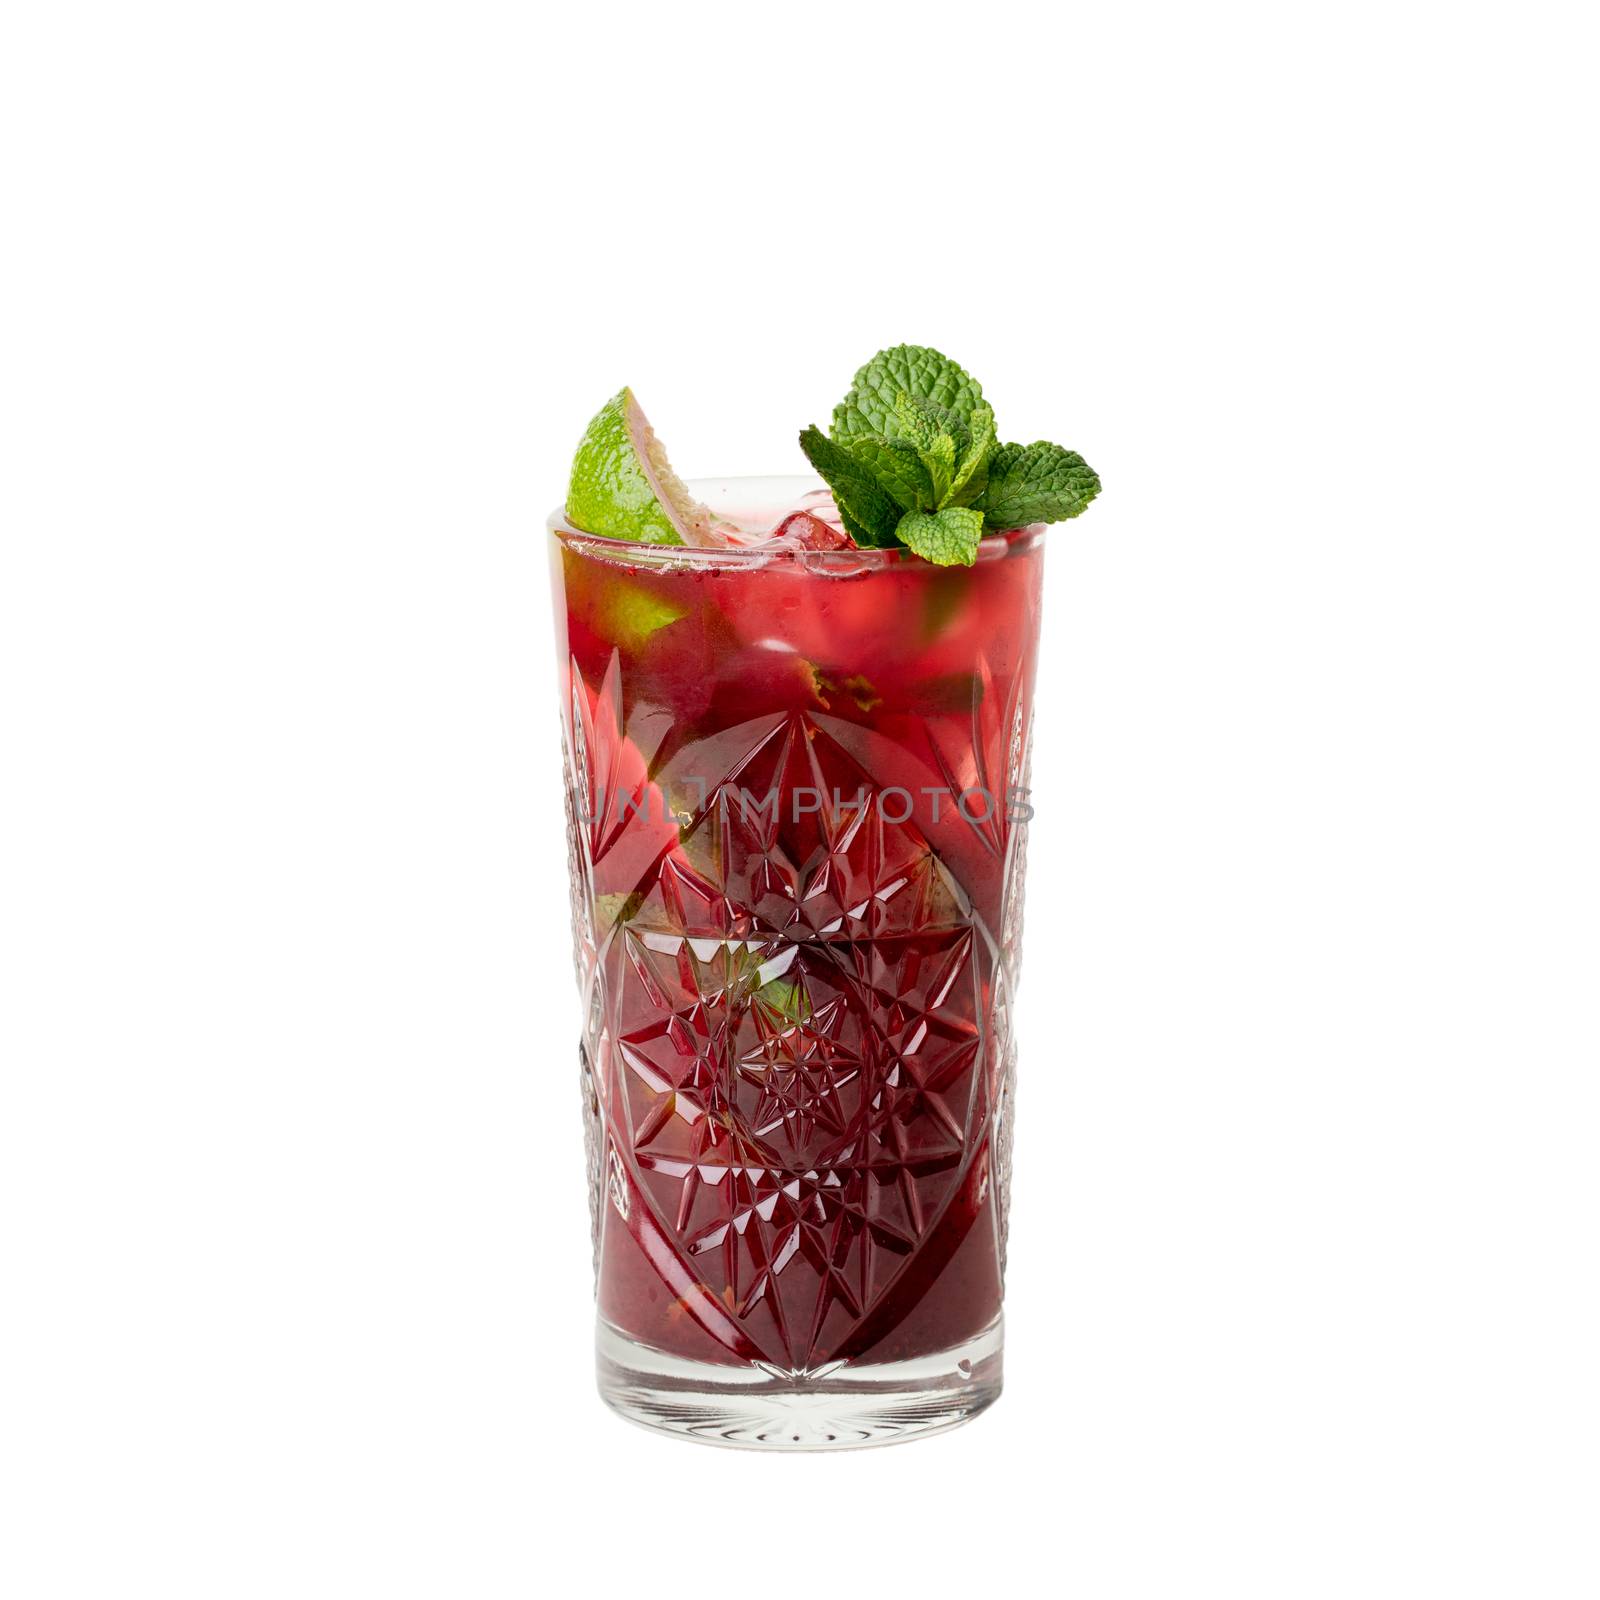 Cold multi fruit cocktail drink with slices of lime, mint leaf isolation on a white